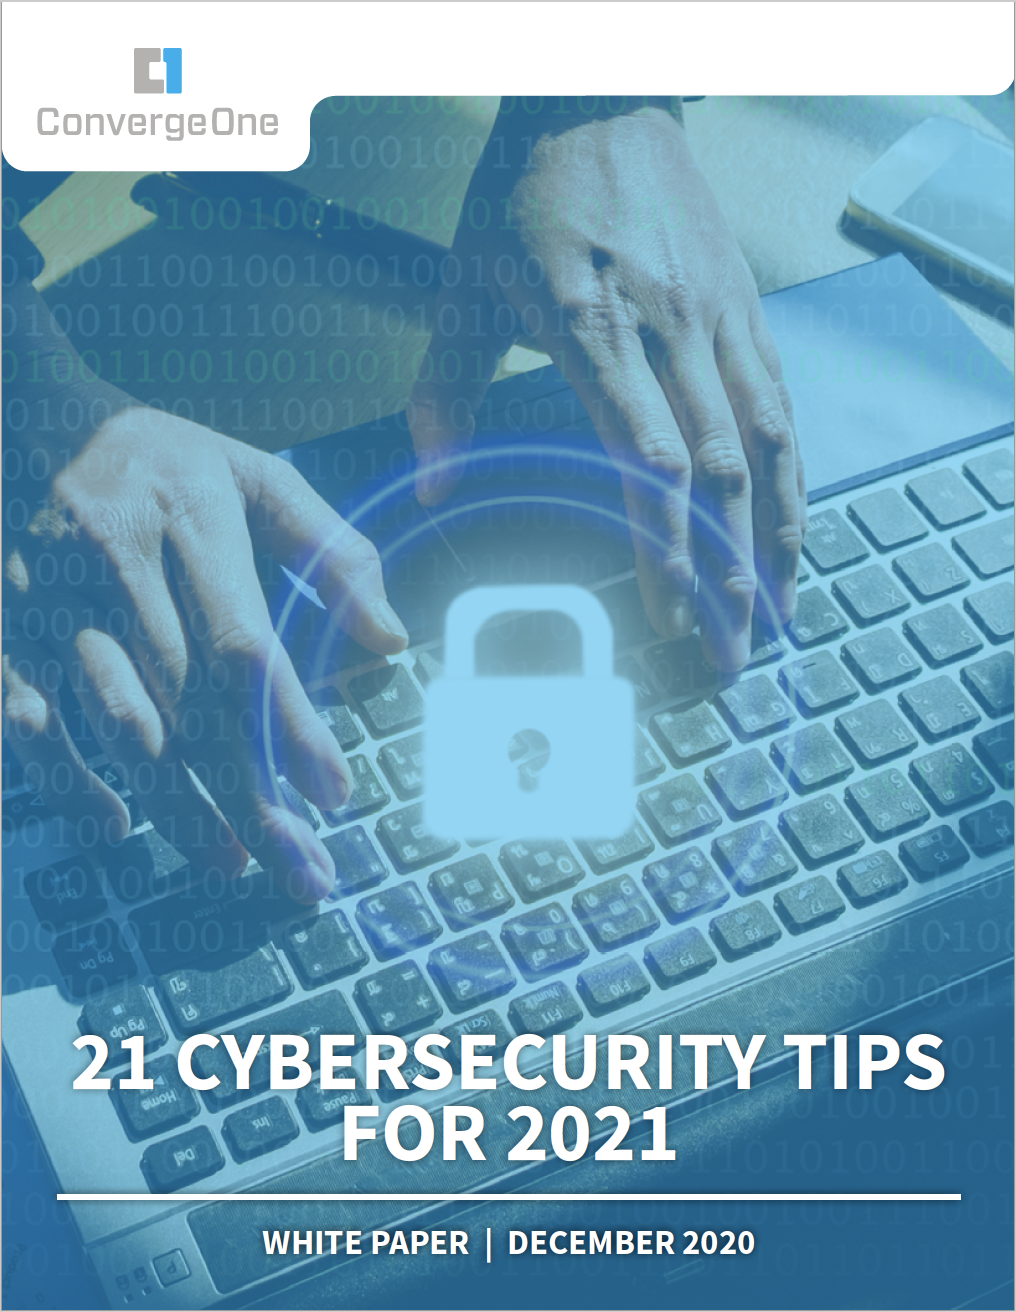 21 Cybersecurity Tips for 2021